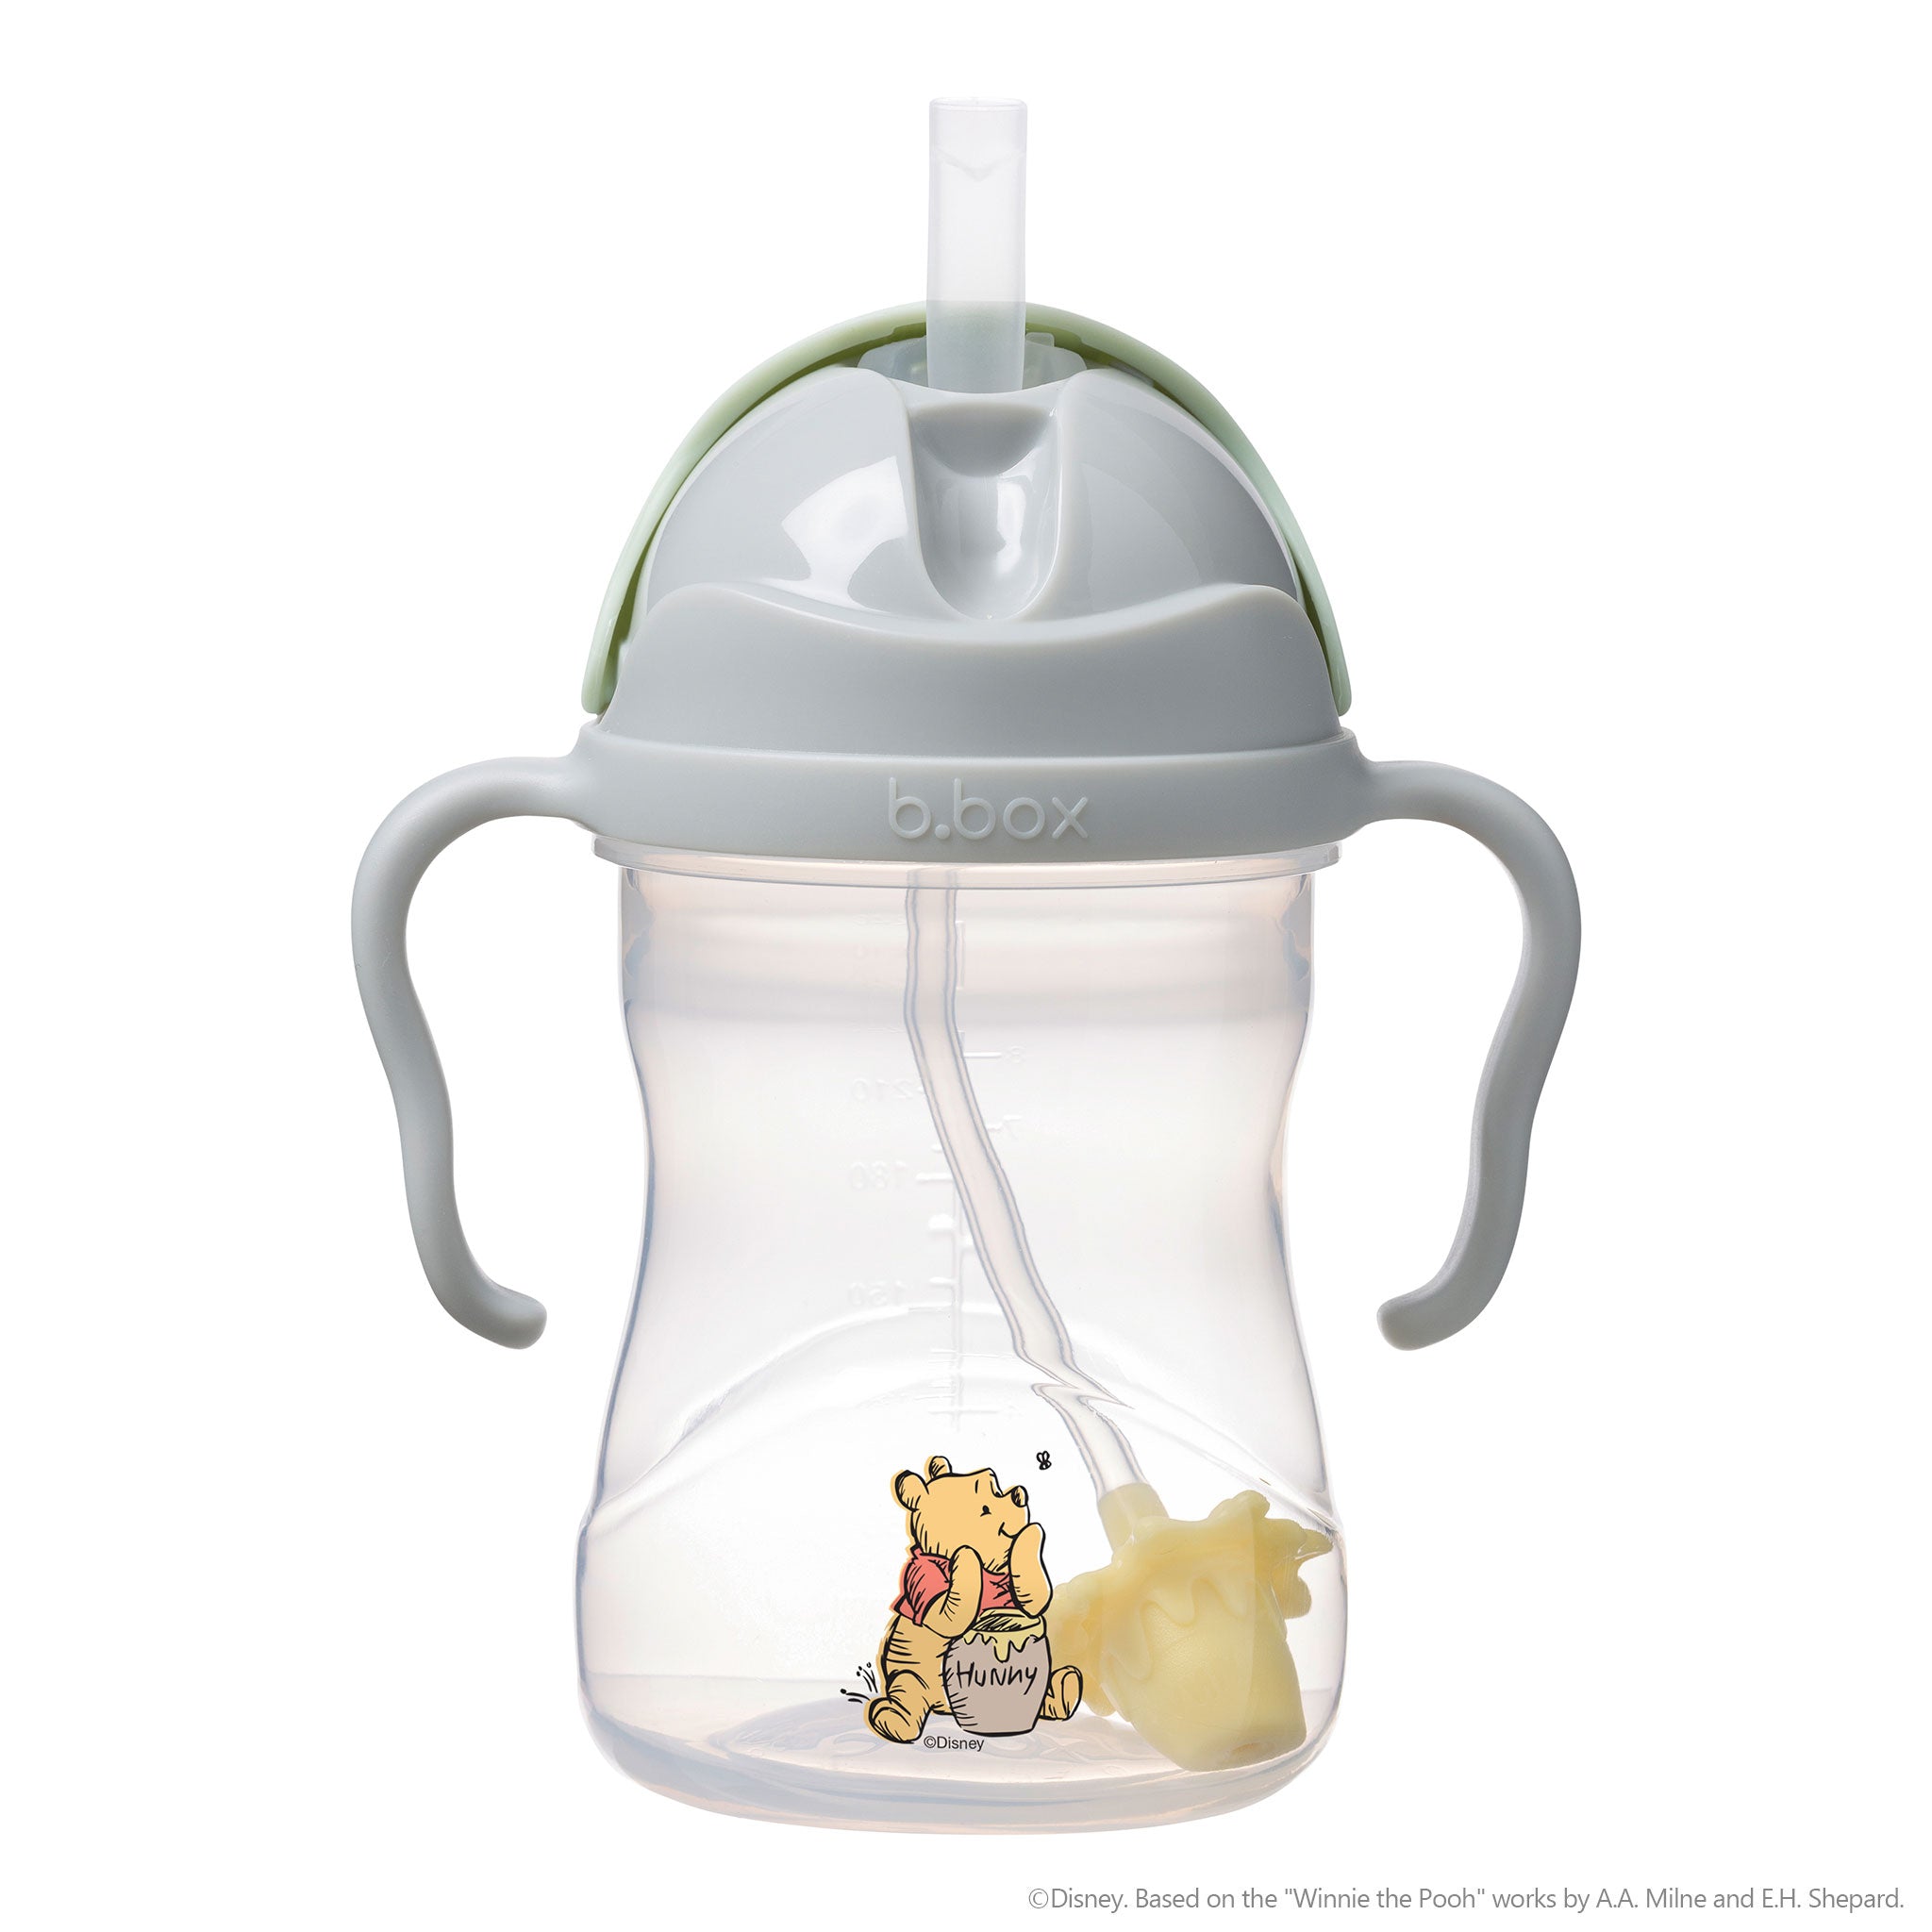 *b.box* Sippy cup ストローマグ シッピーカップ - Winnie the Pooh